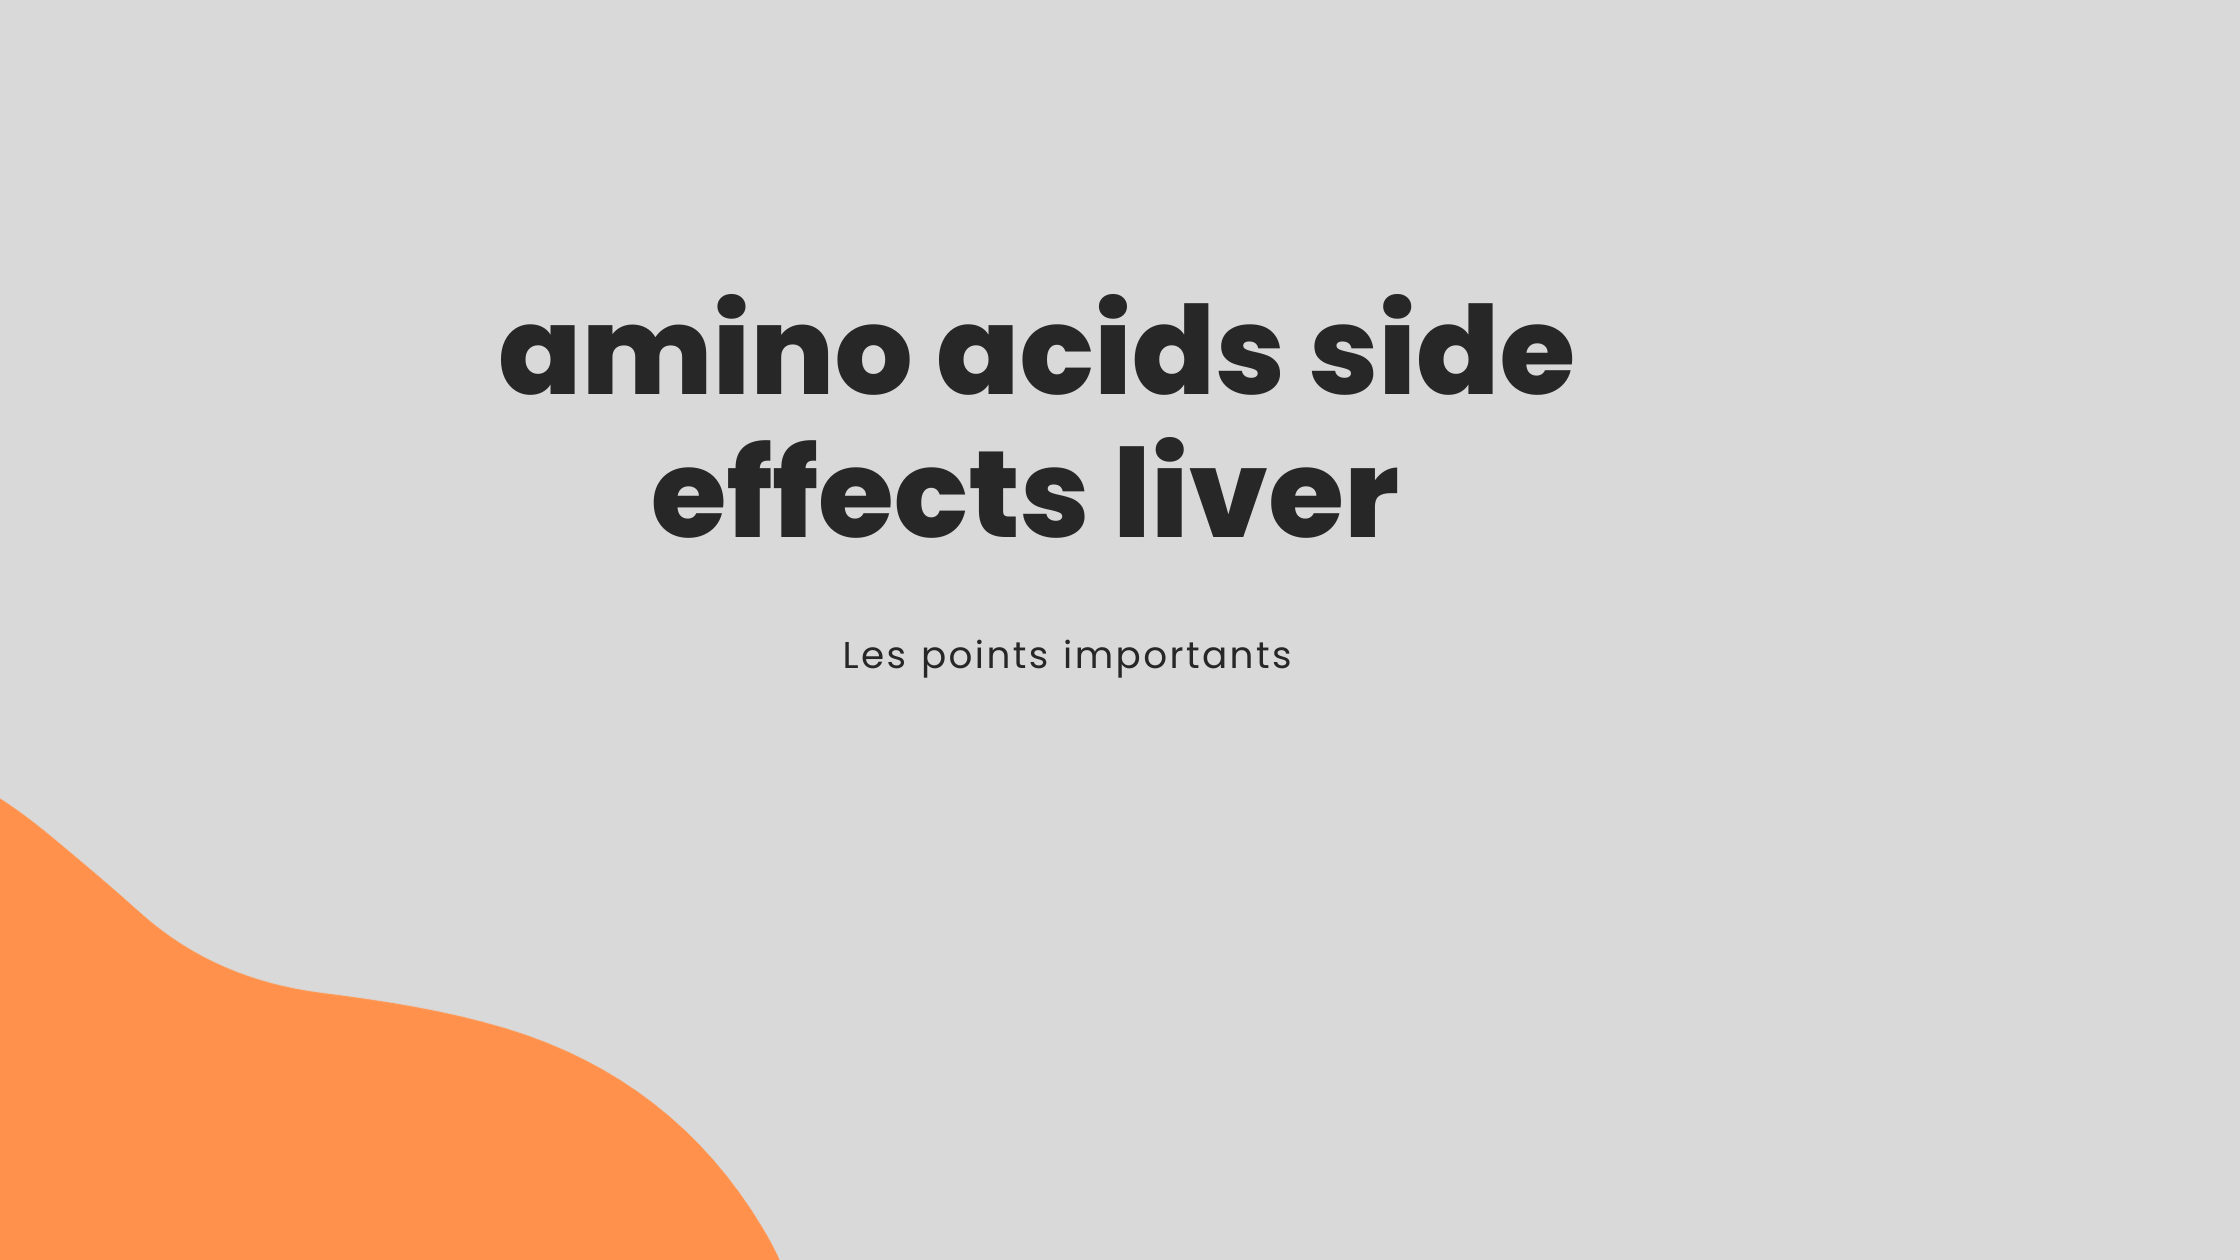 amino acids side effects liver | Les points importants